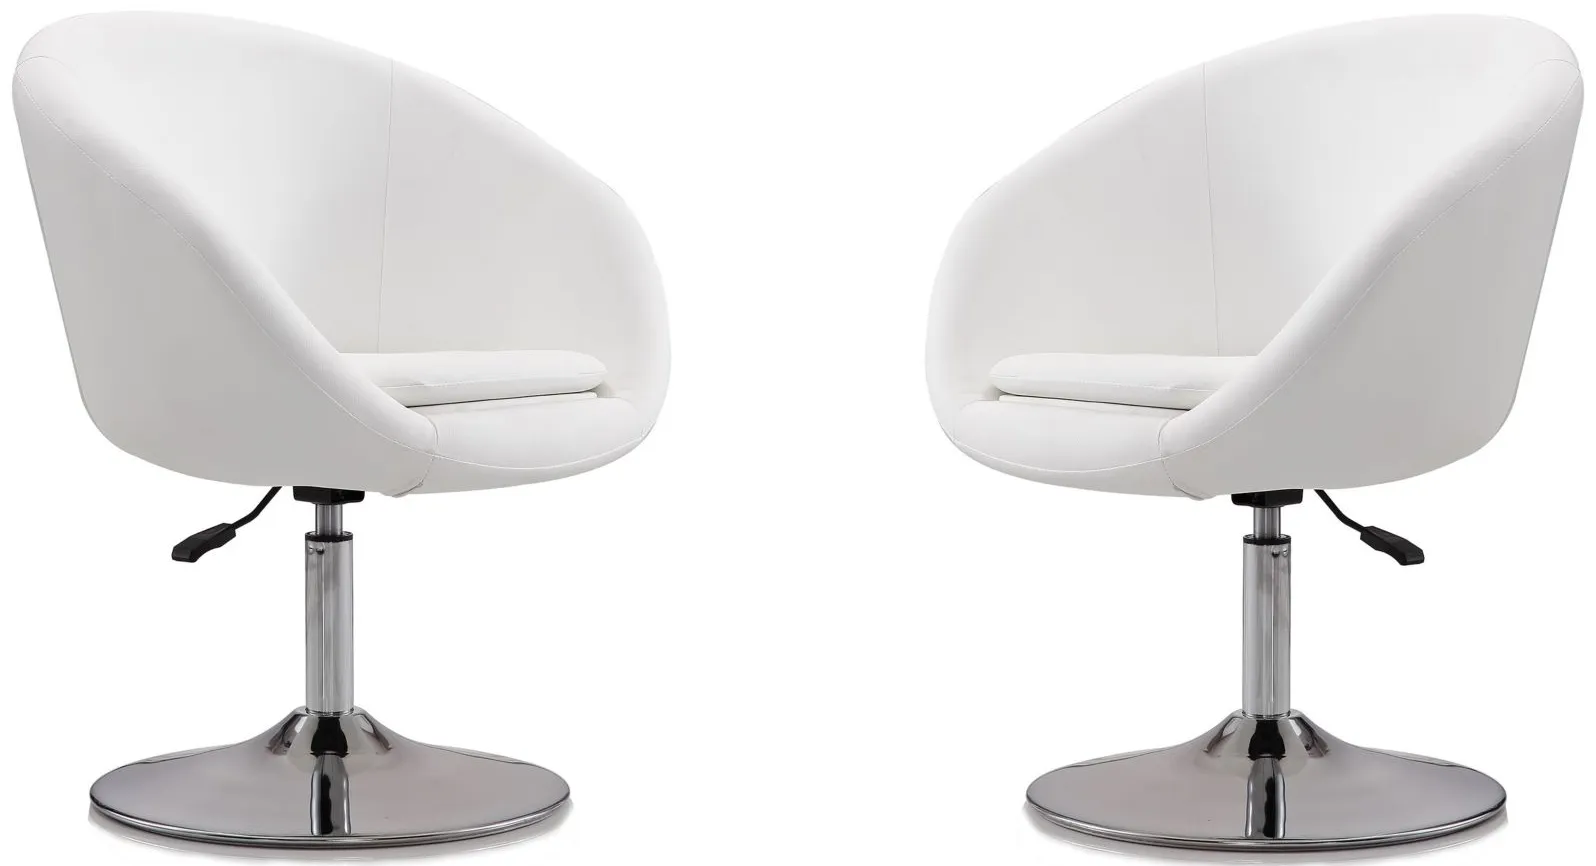 Hopper Swivel Adjustable Height Faux Leather Chair (Set of 2) in White and Polished Chrome by Manhattan Comfort